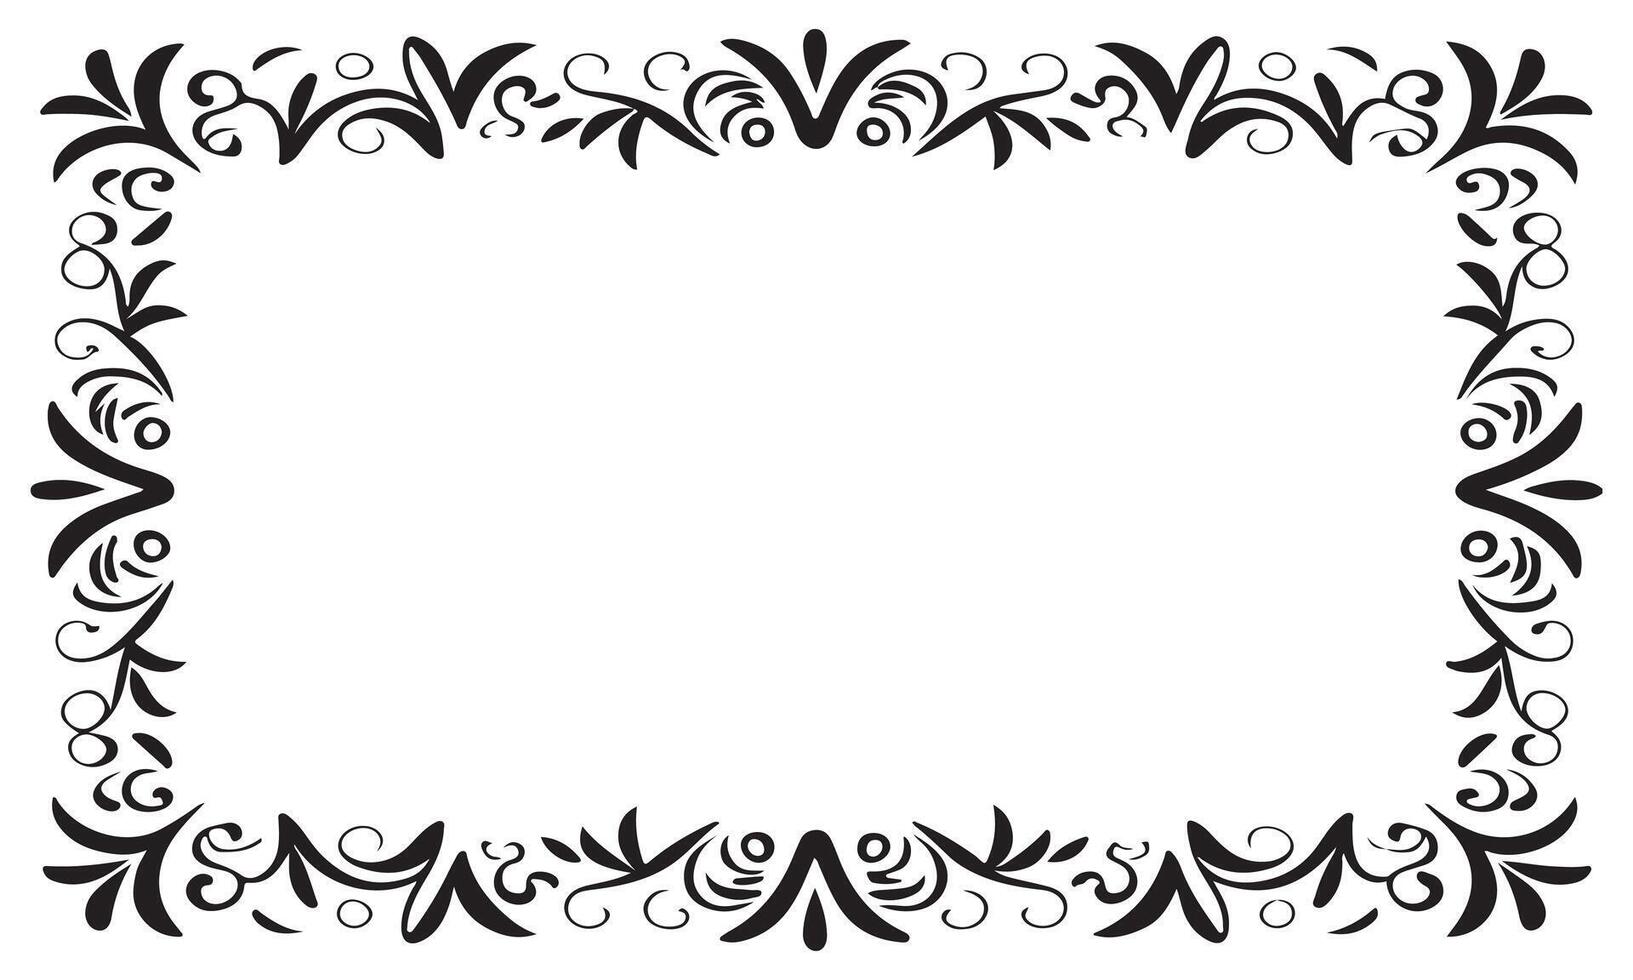 Calligraphic hand drawn doodle floral frame. artistic calligraphy design element. vector